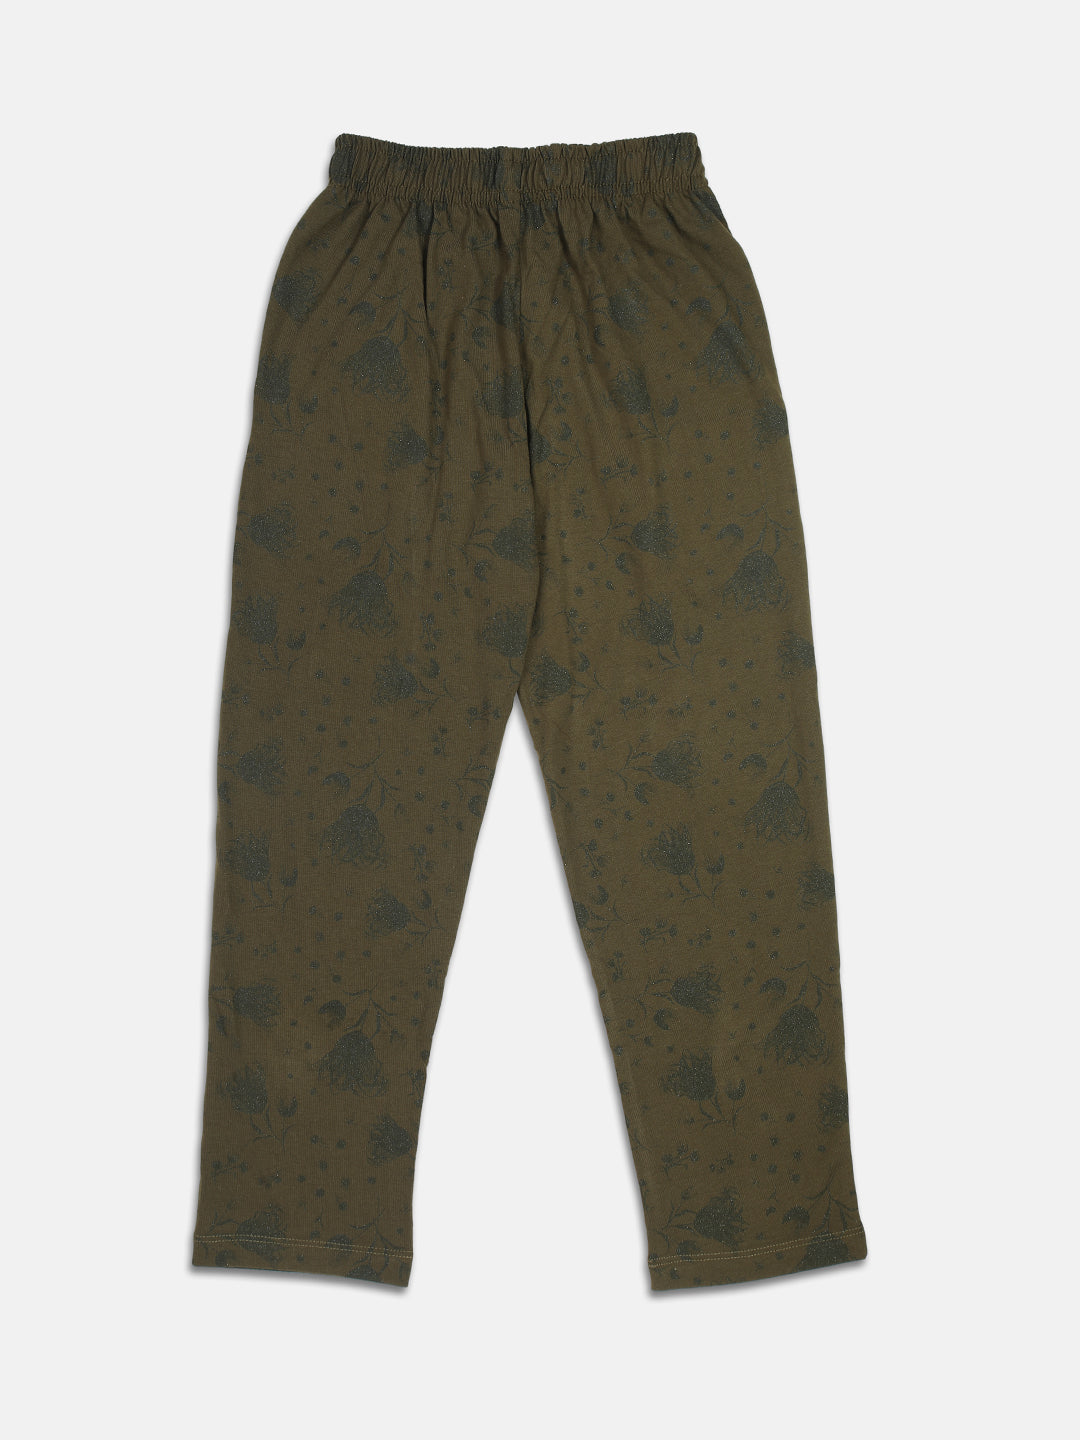 Nins Moda Full Length All Over Printed Track Pants - Olive Green